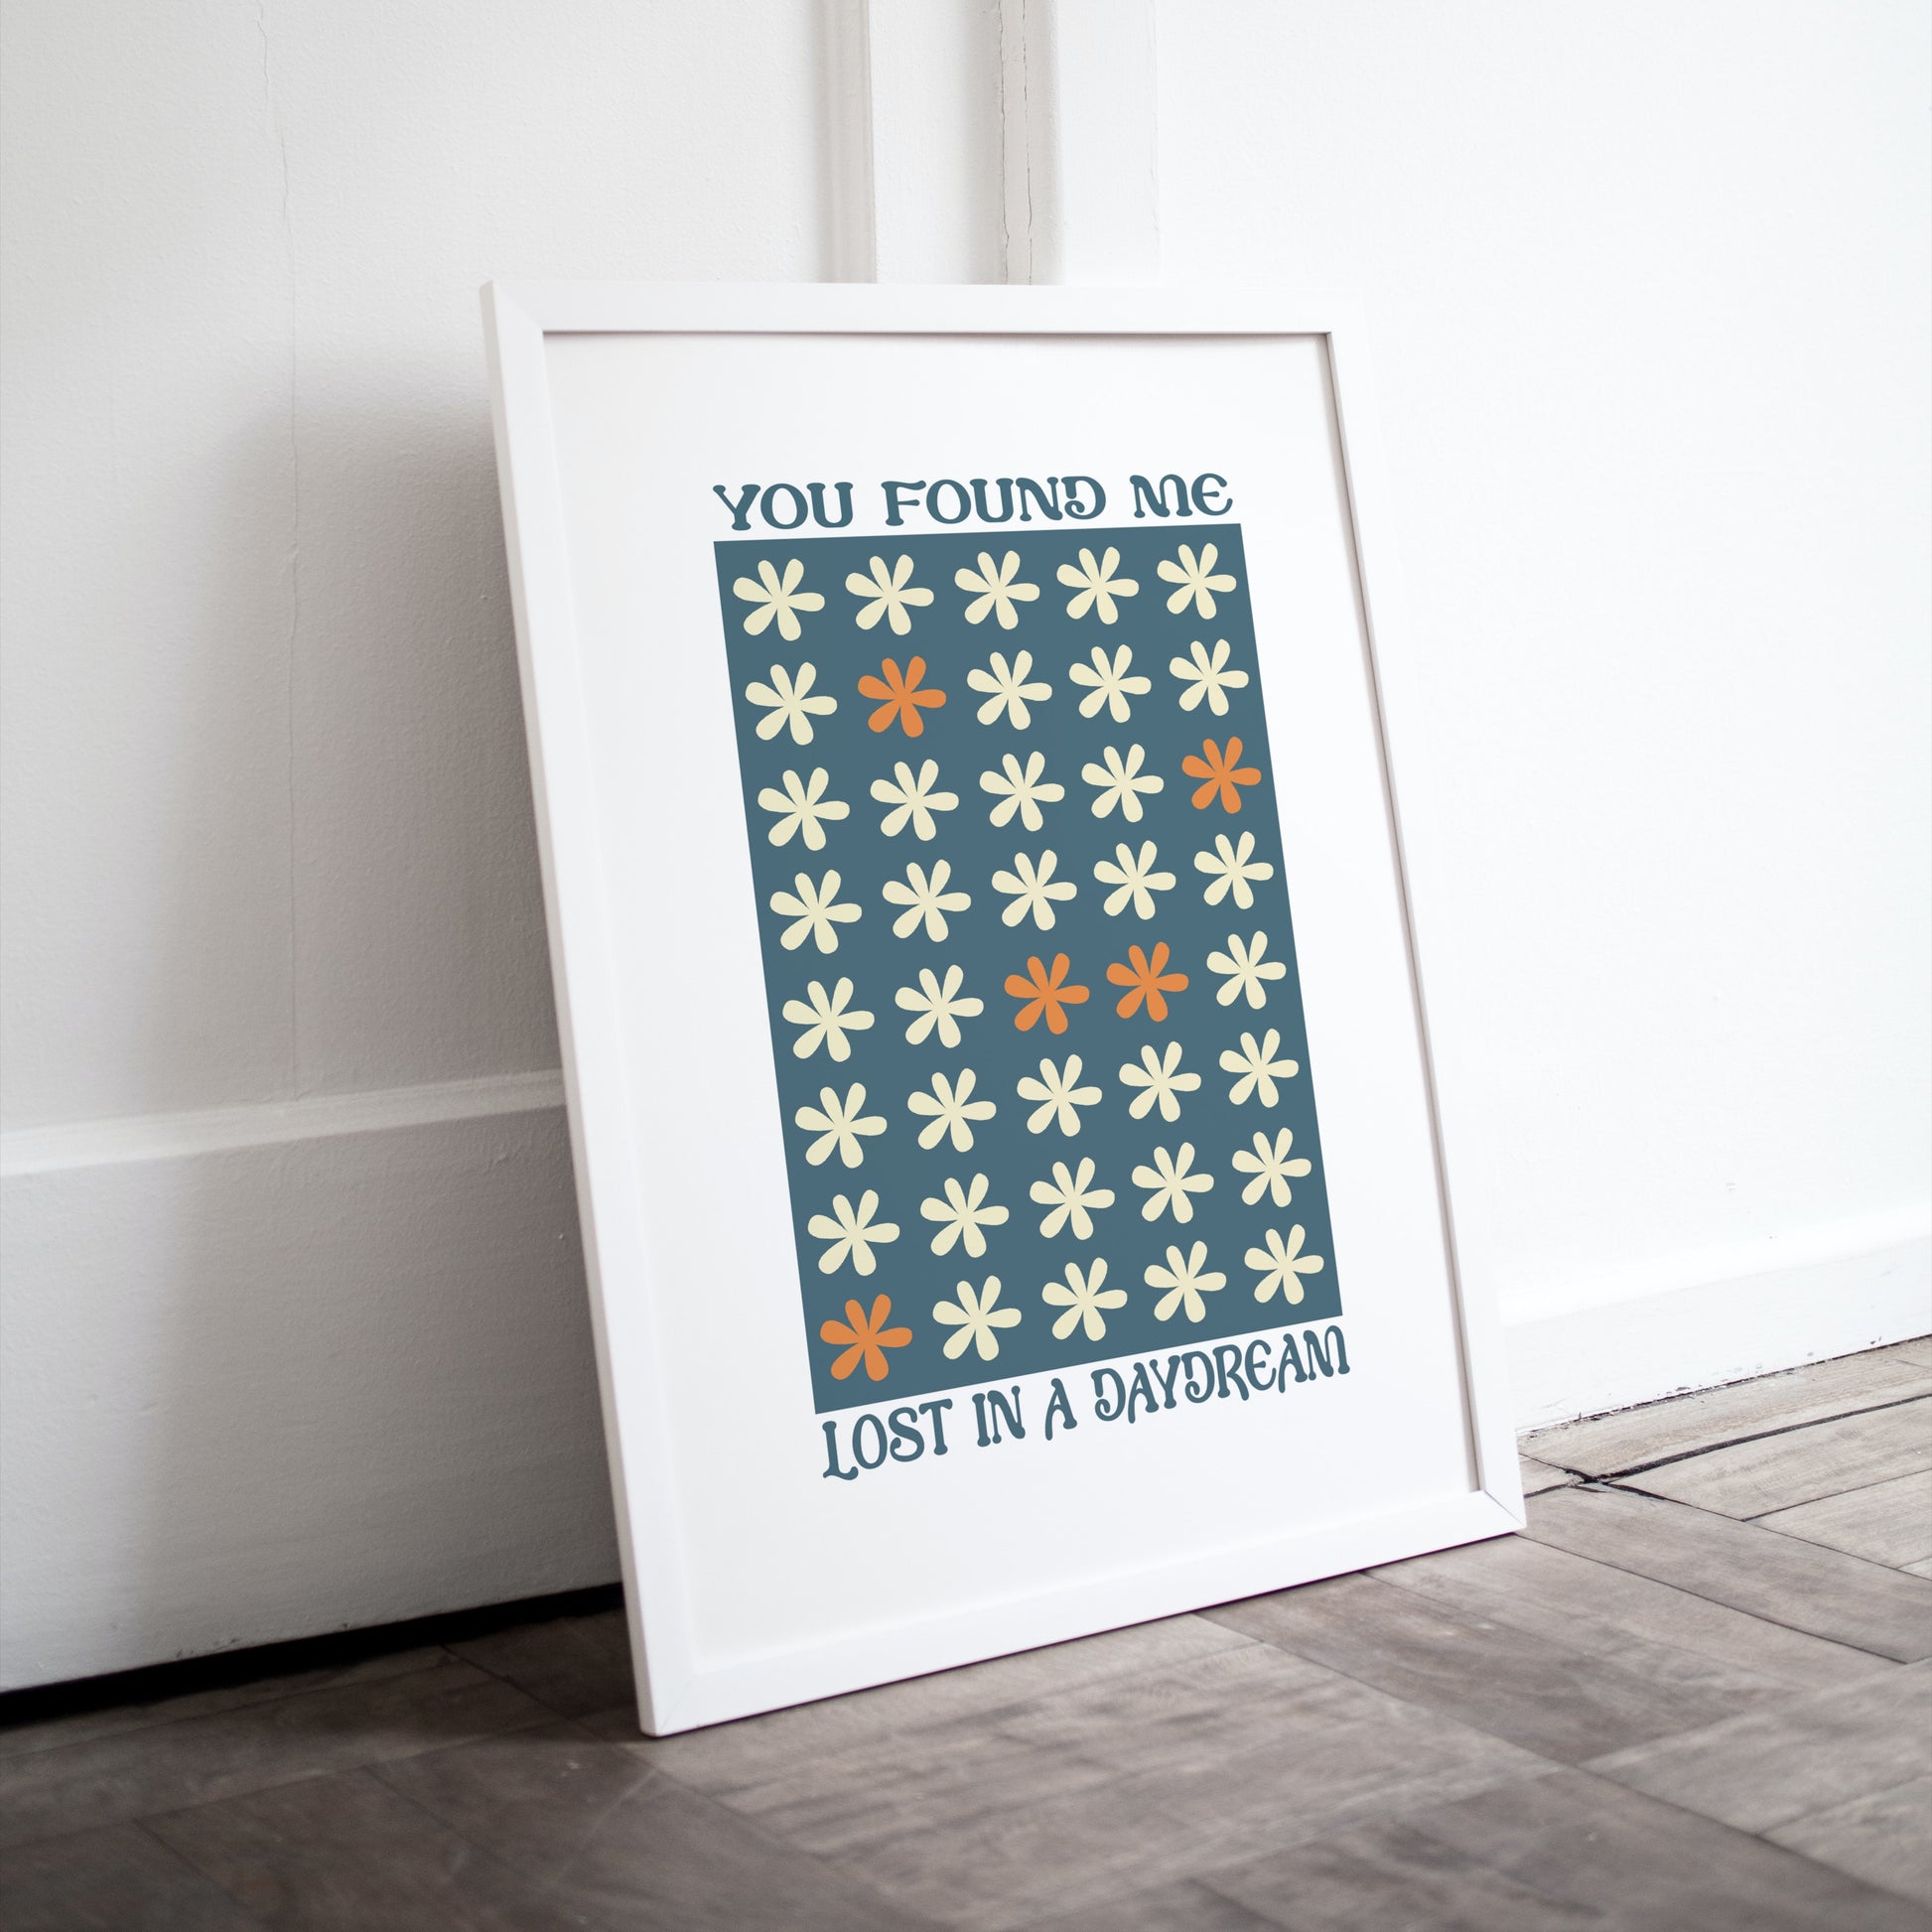 You found me lost in a day dream - art print poster - daisy jones and the six - cuddles in the kitchen